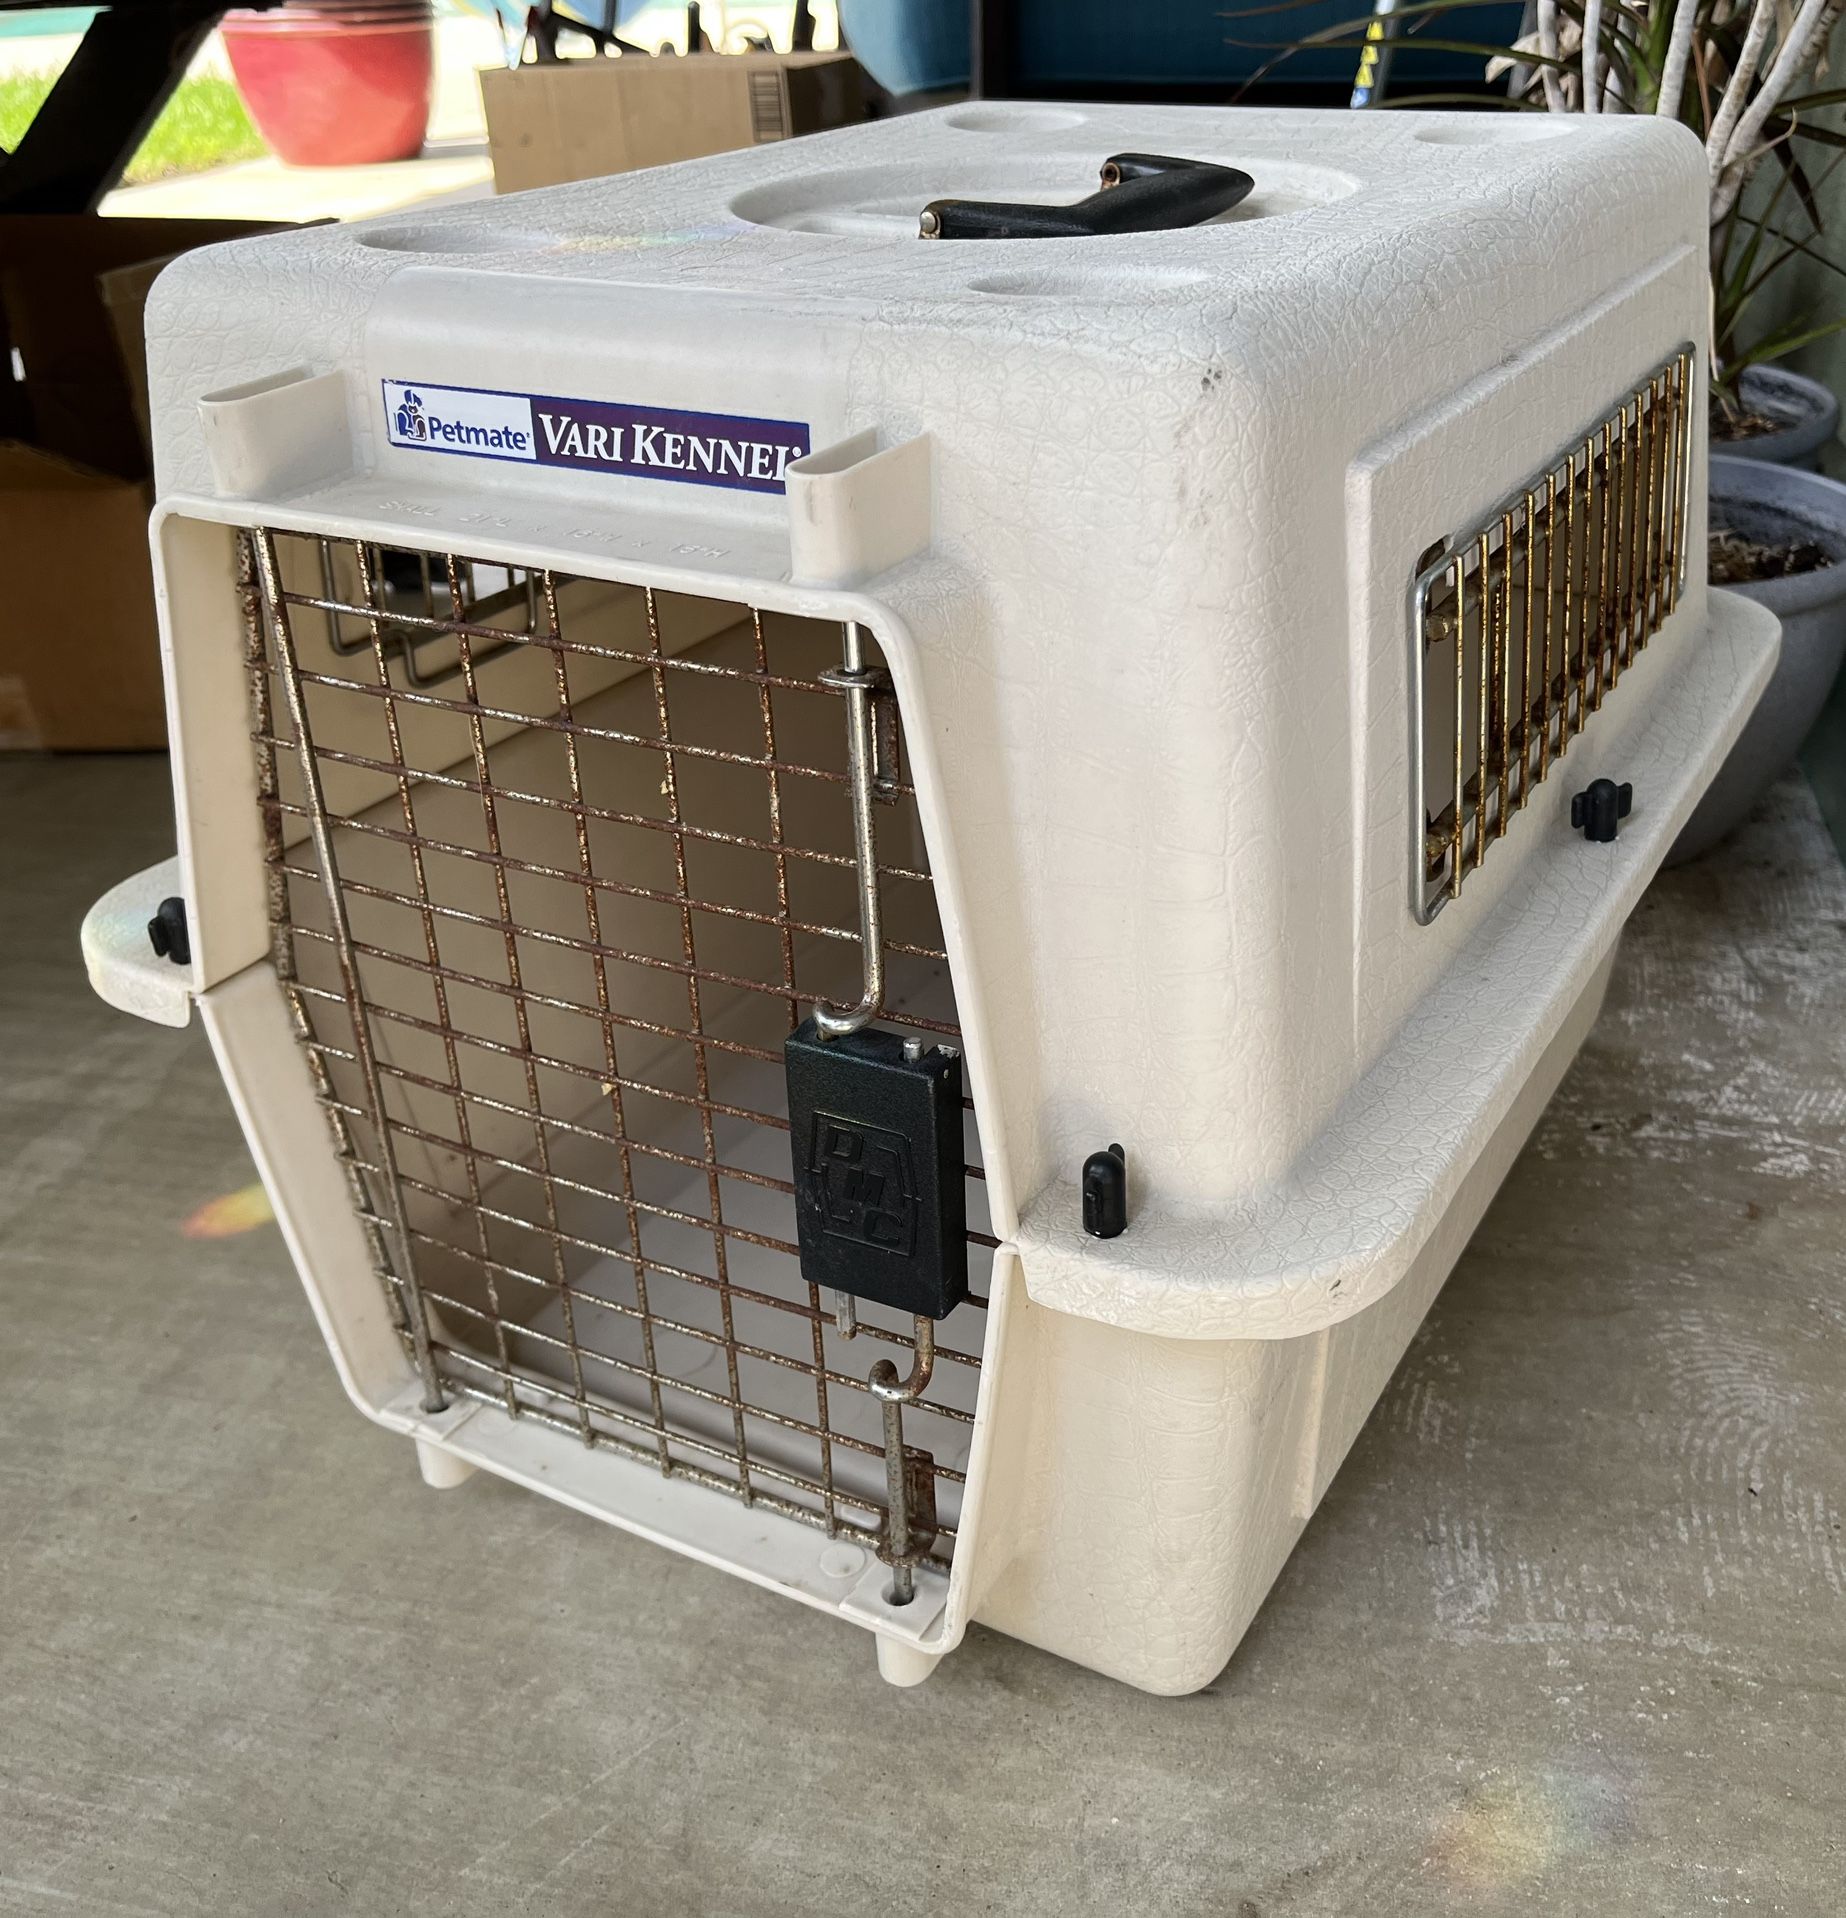 Small Dog Kennel